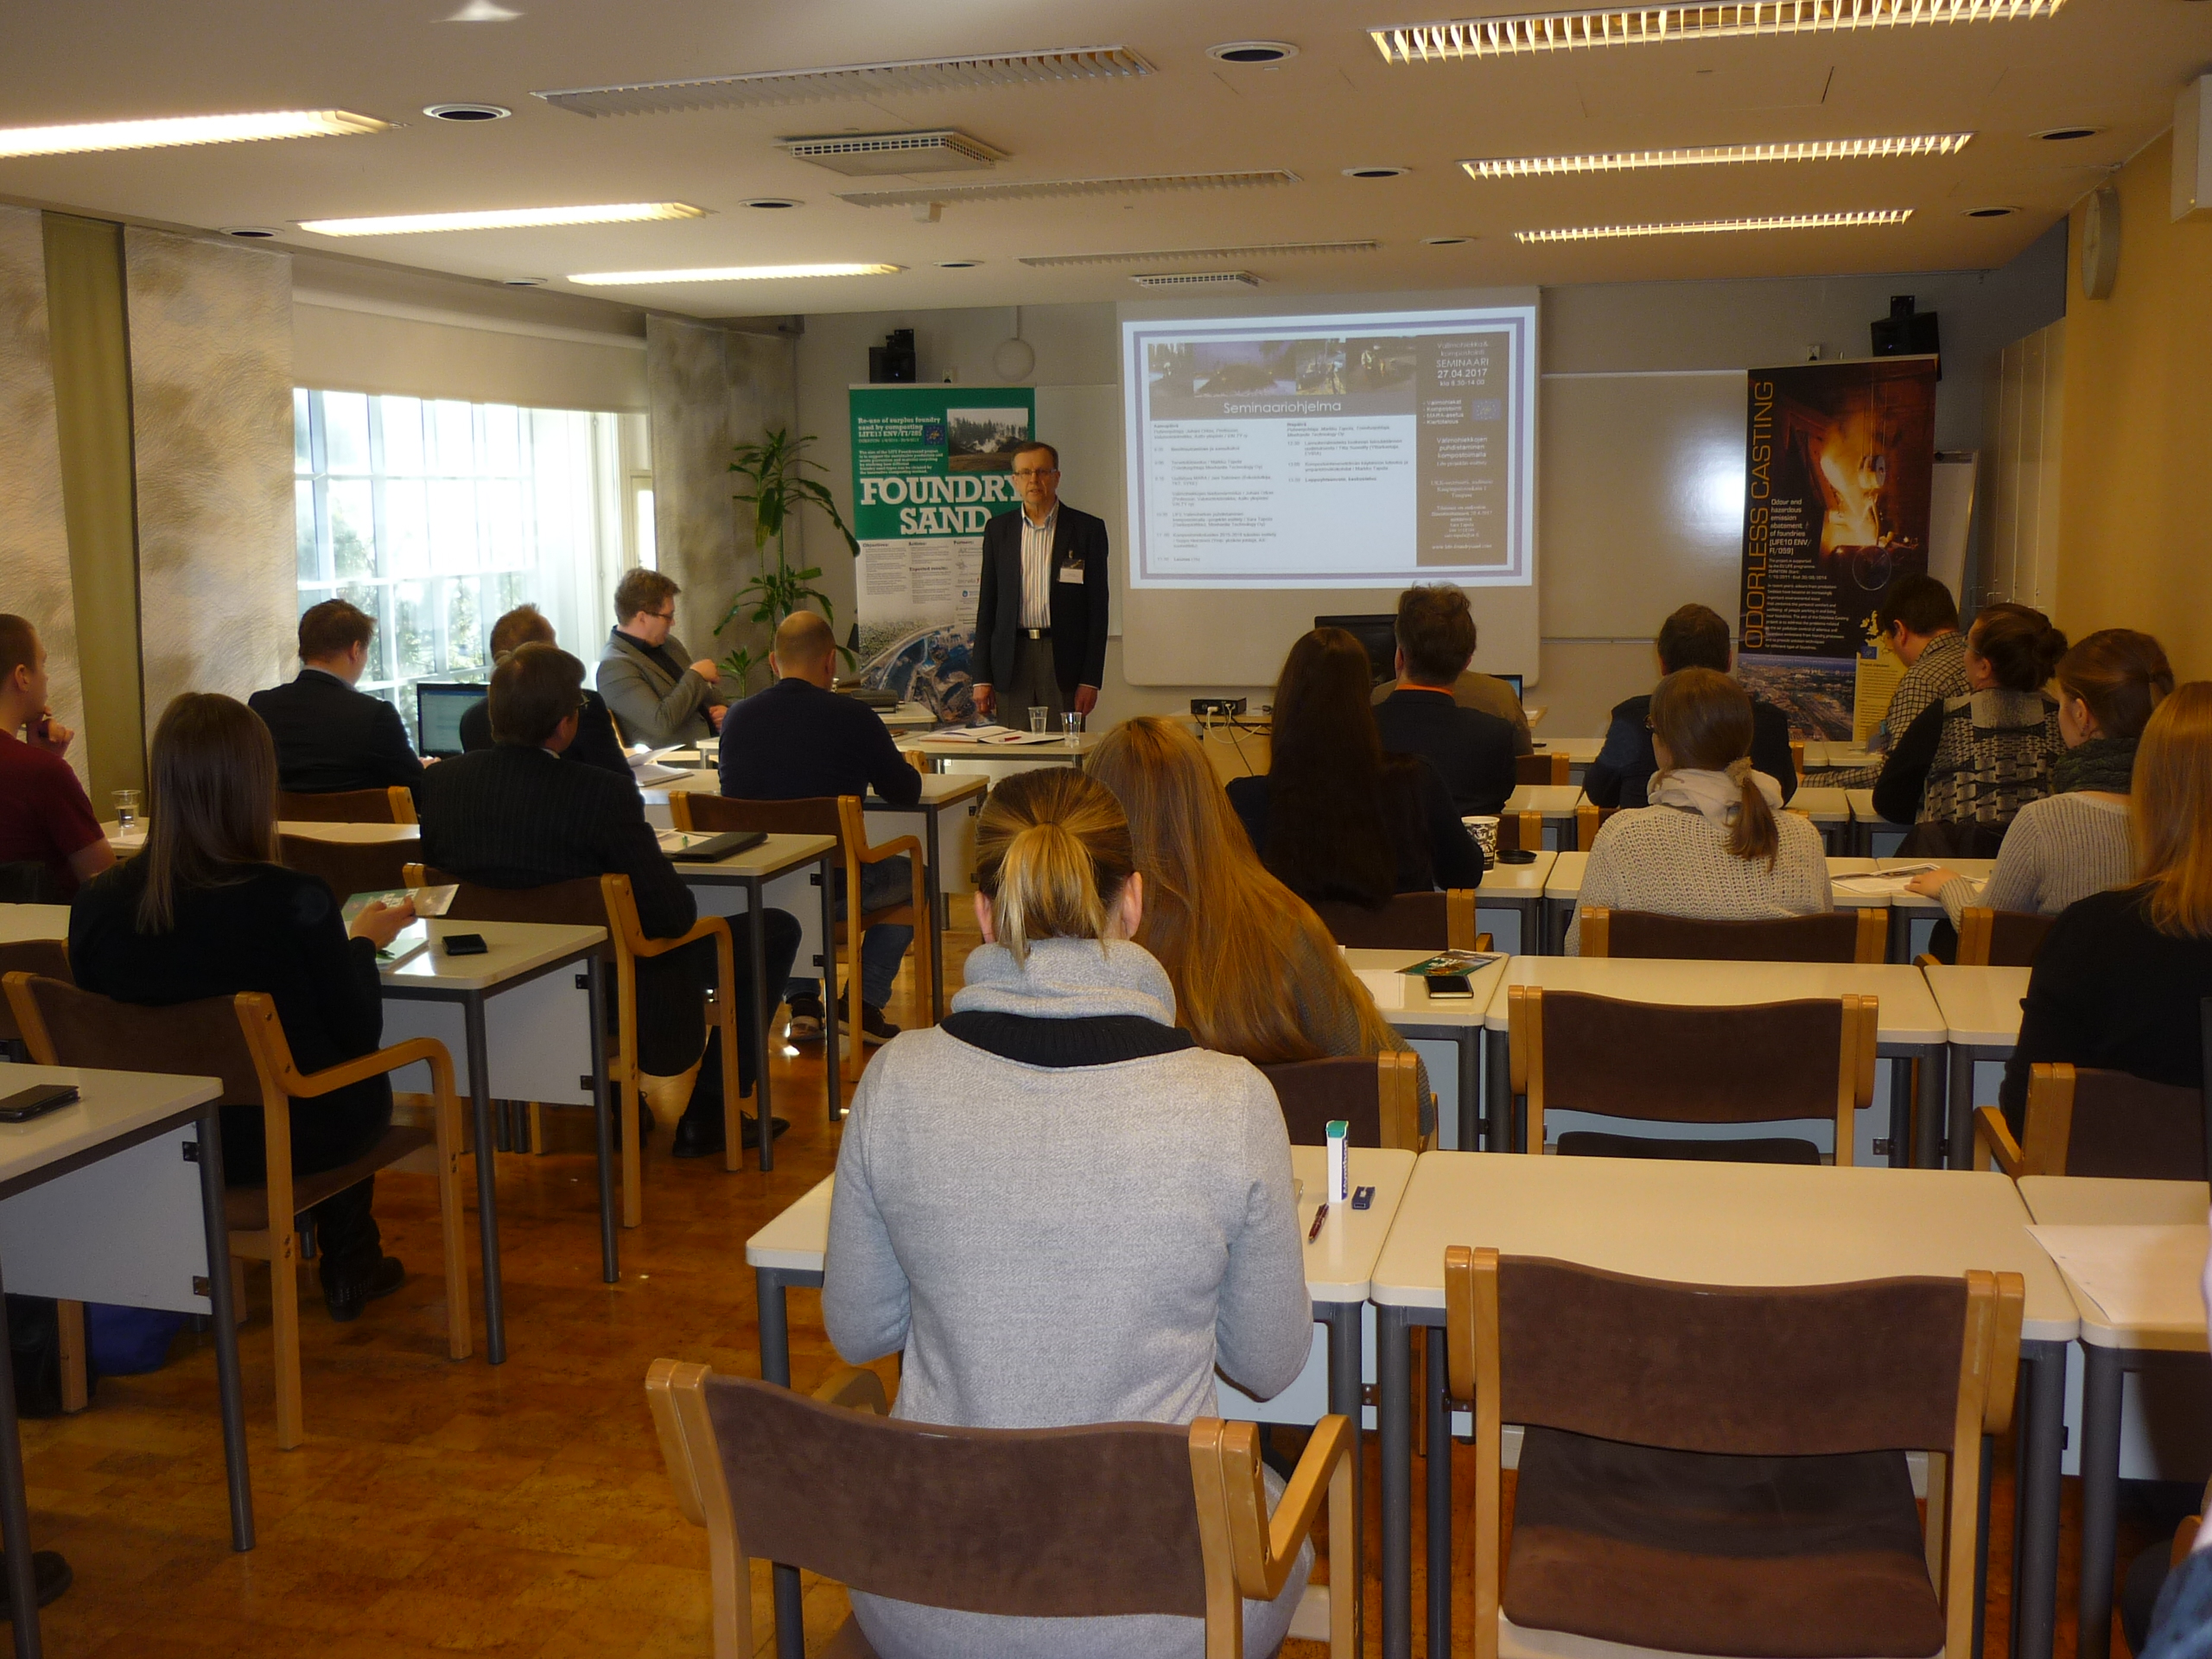 Project seminar was arranged in Tampere